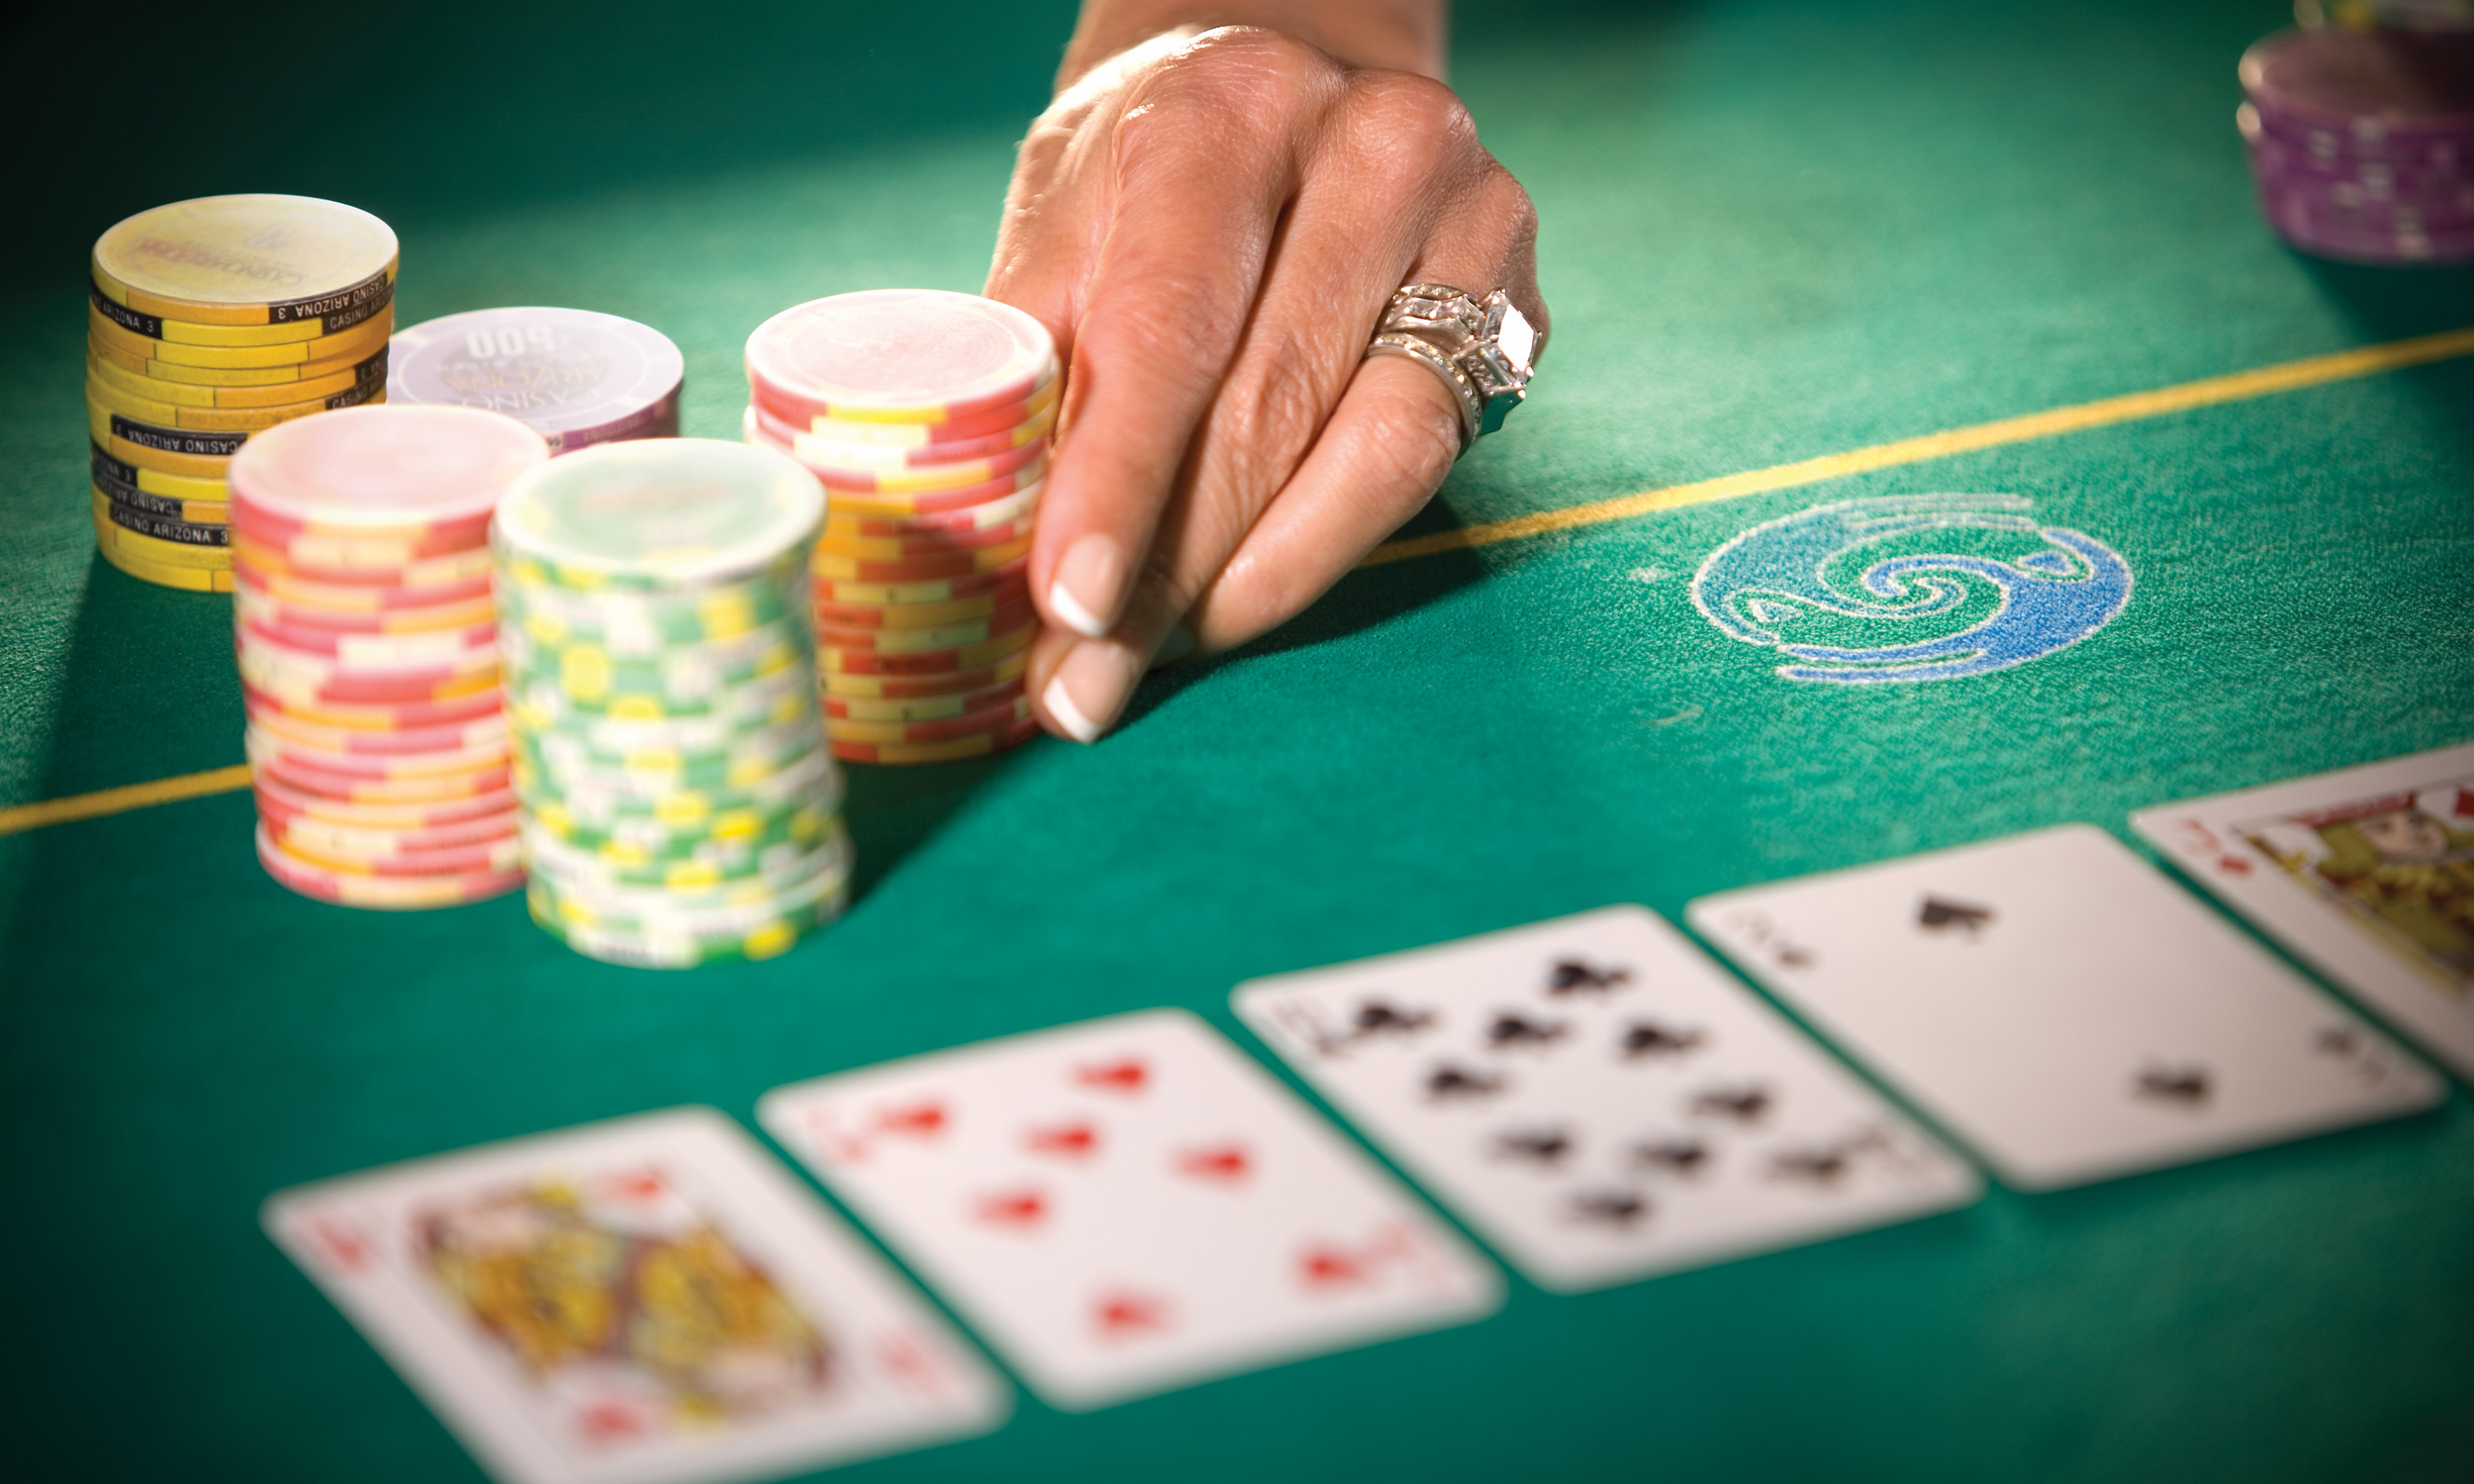 Accessibility with the online poker hub